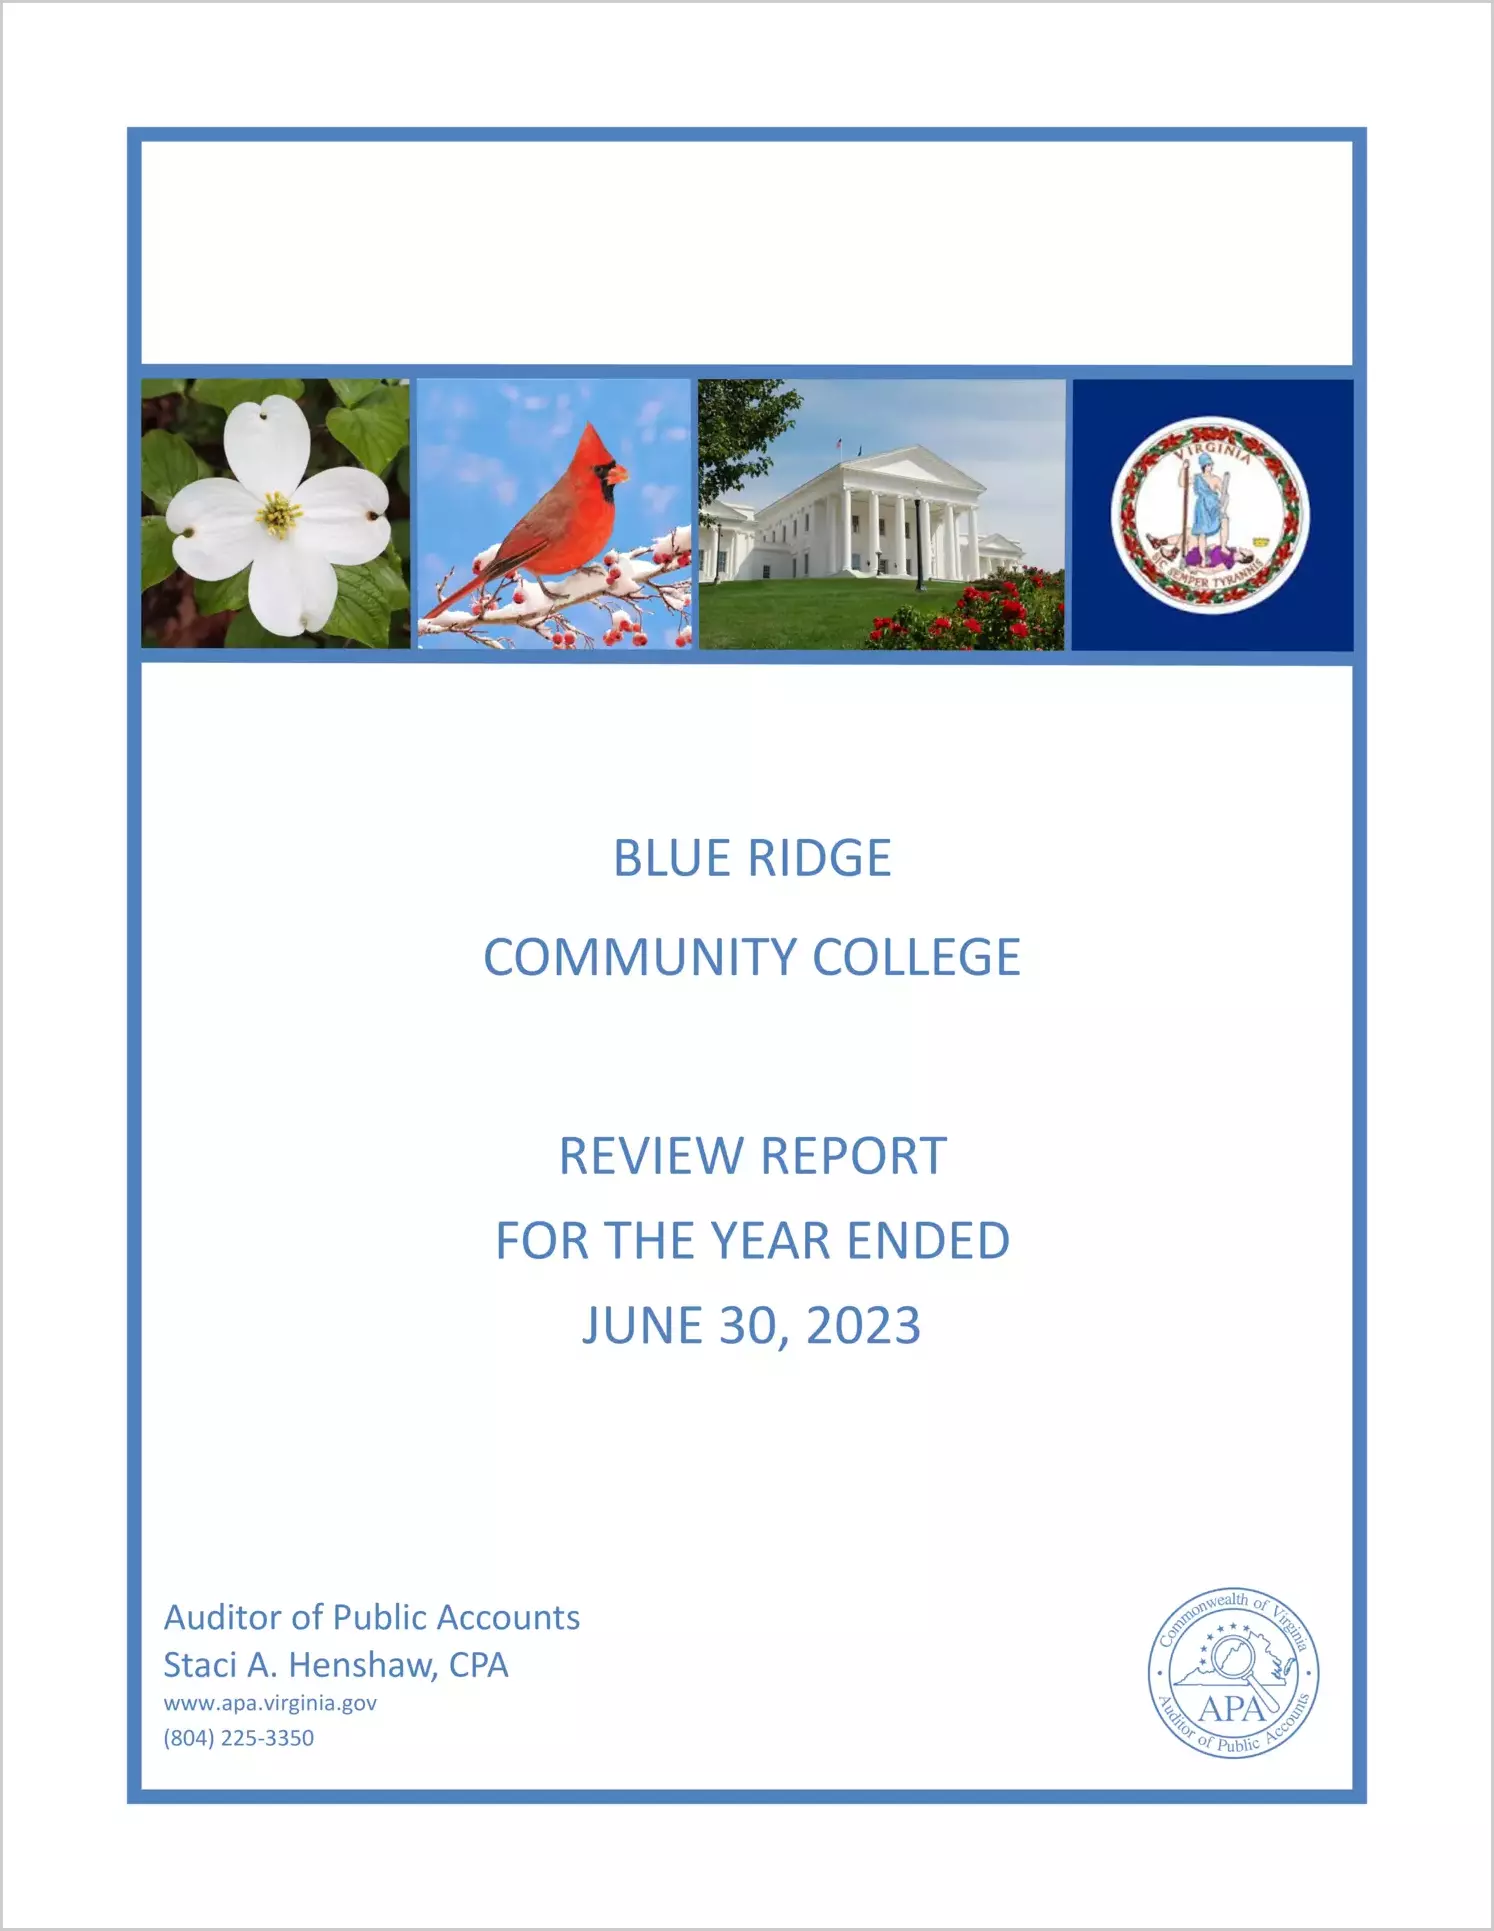 Blue Ridge Community College Reaccreditation Review for the year ended June 30, 2023